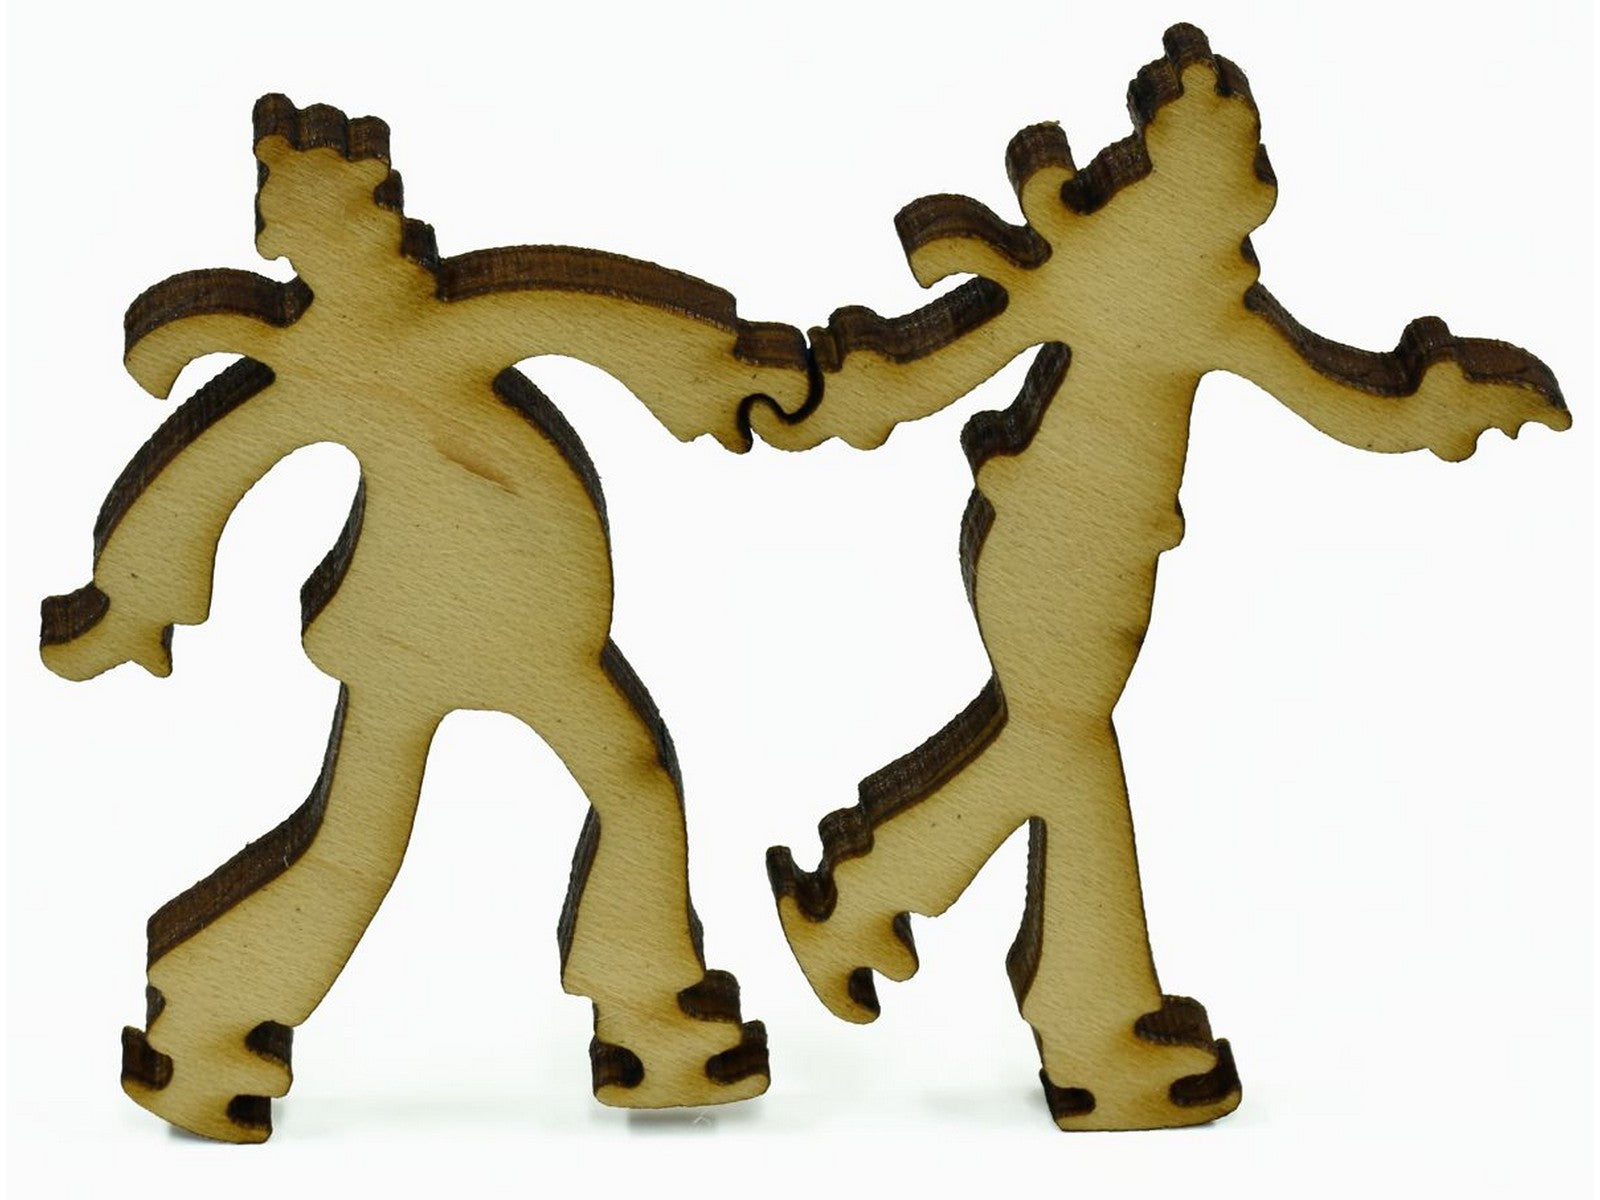 A closeup of pieces showing two people skating.